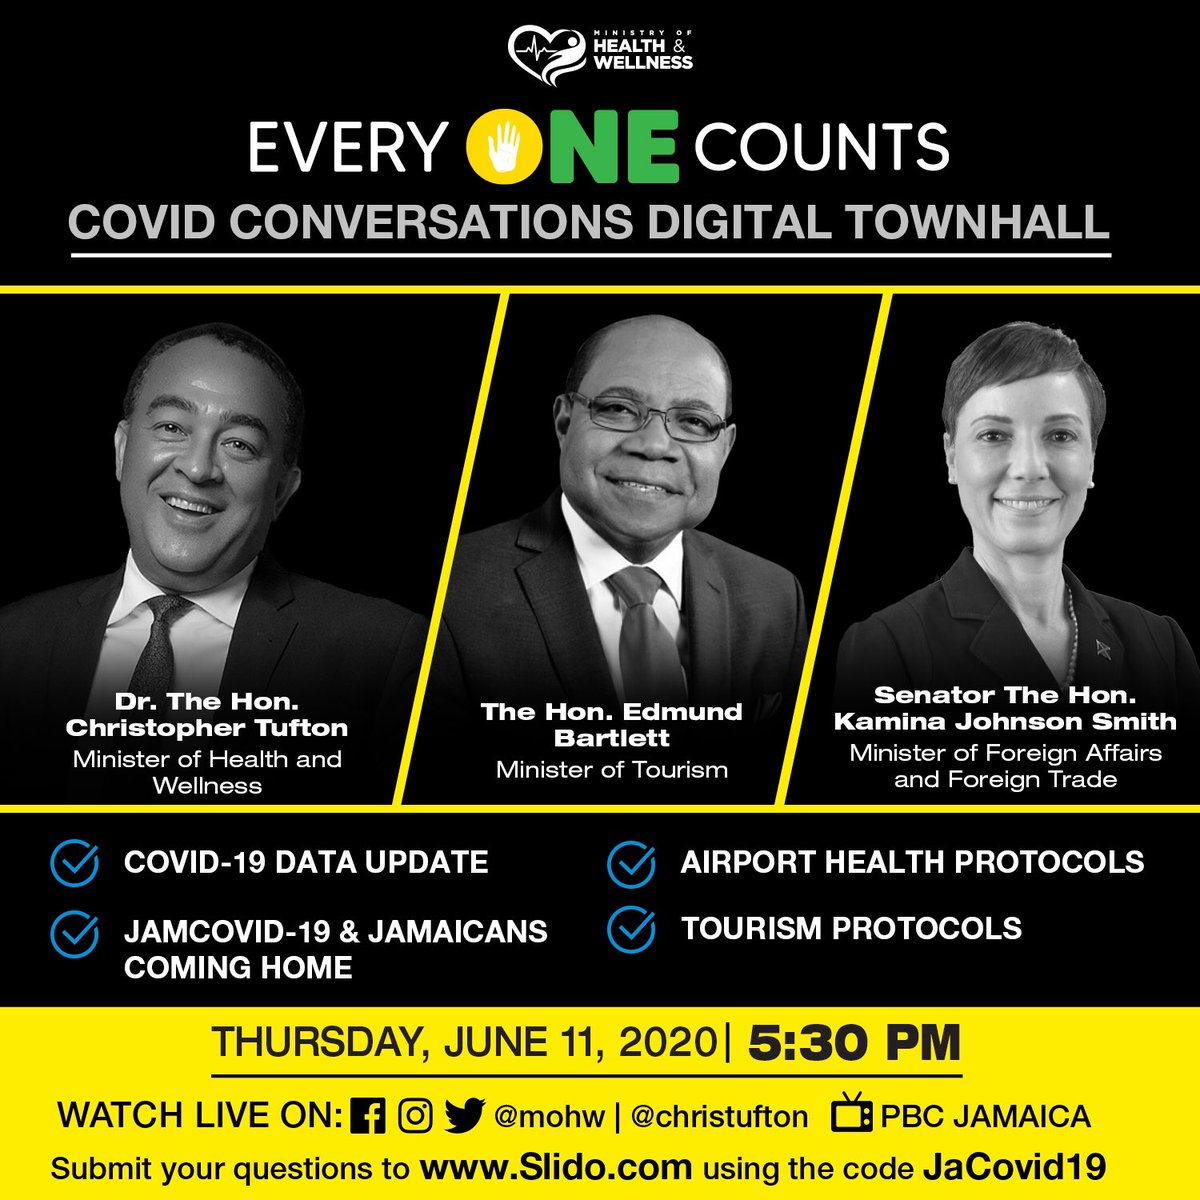 We want you to be a part of the conversation.
 Submit your questions to Slido.com using the code JaCovid19 by 4:00 pm to have them answered. 
Every One Counts. 
#JaCOVID19 #EveryOneCounts #CovidConversations